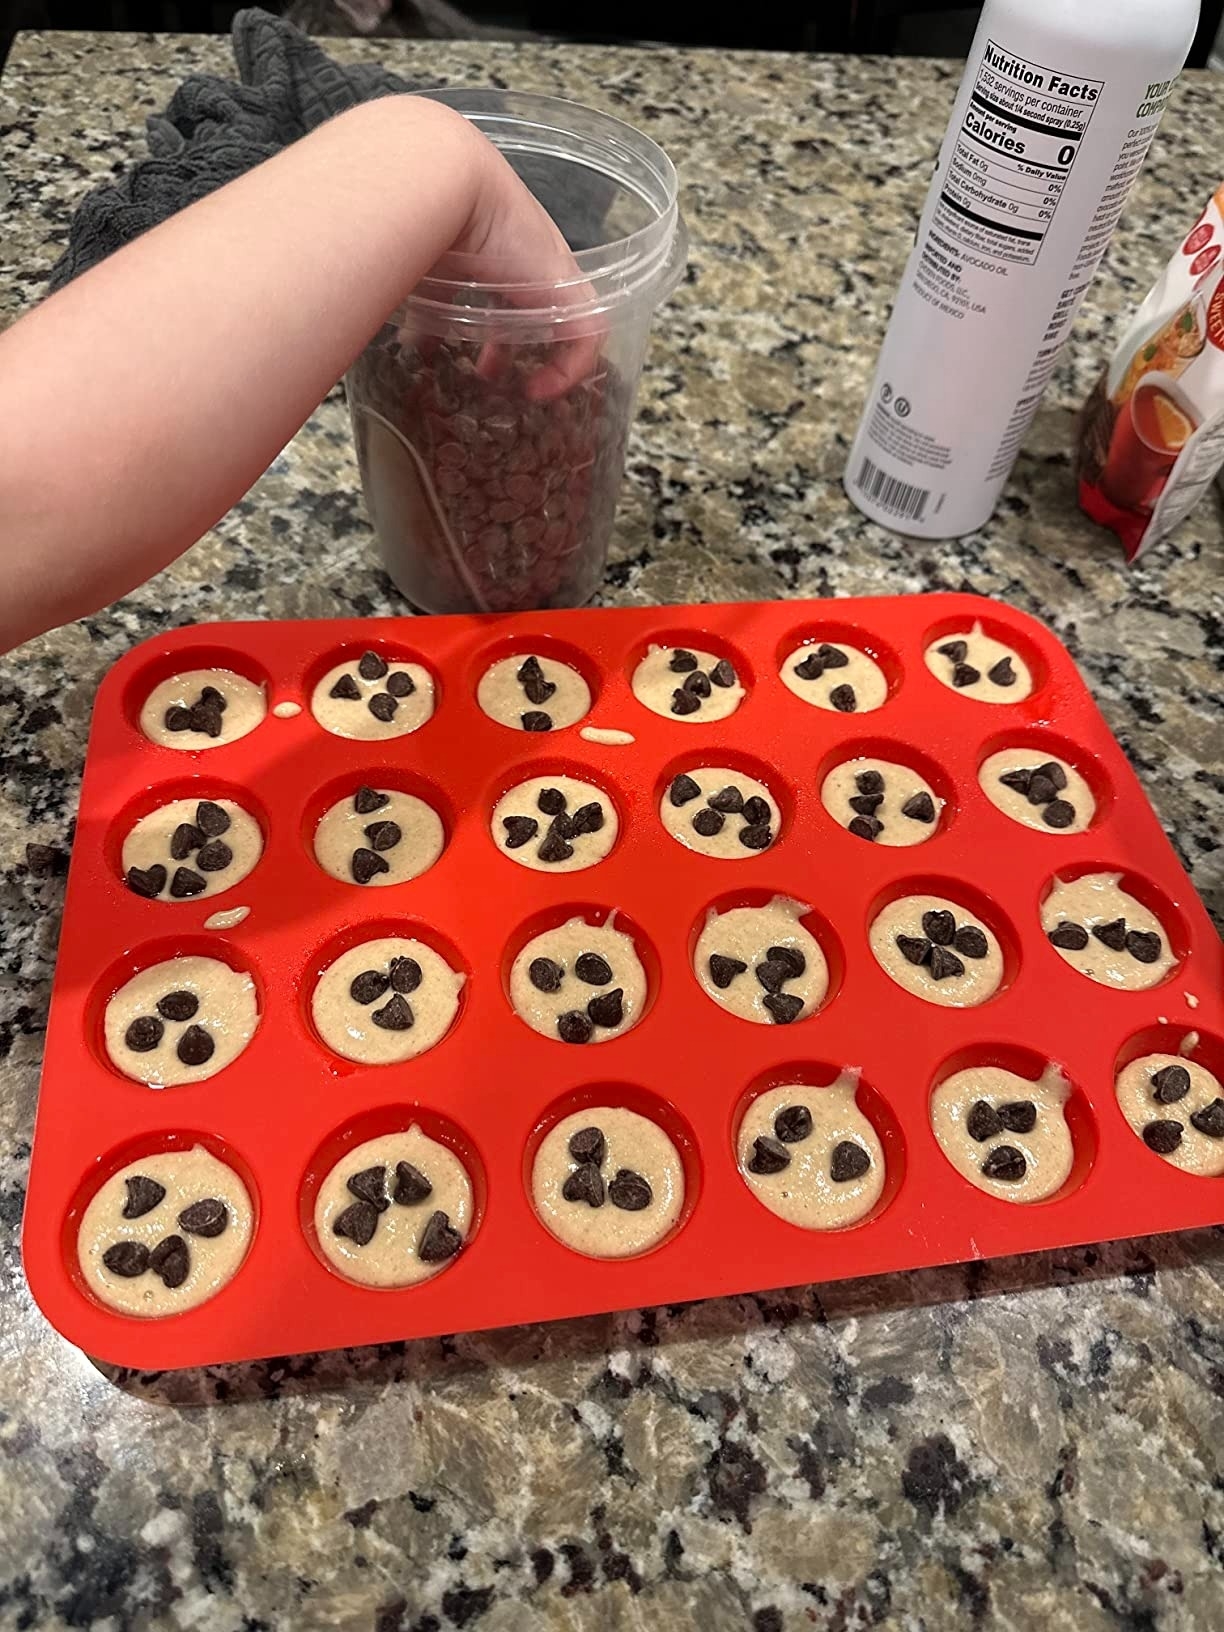 Hand placing chocolate chips on cookie dough balls in a red baking tray